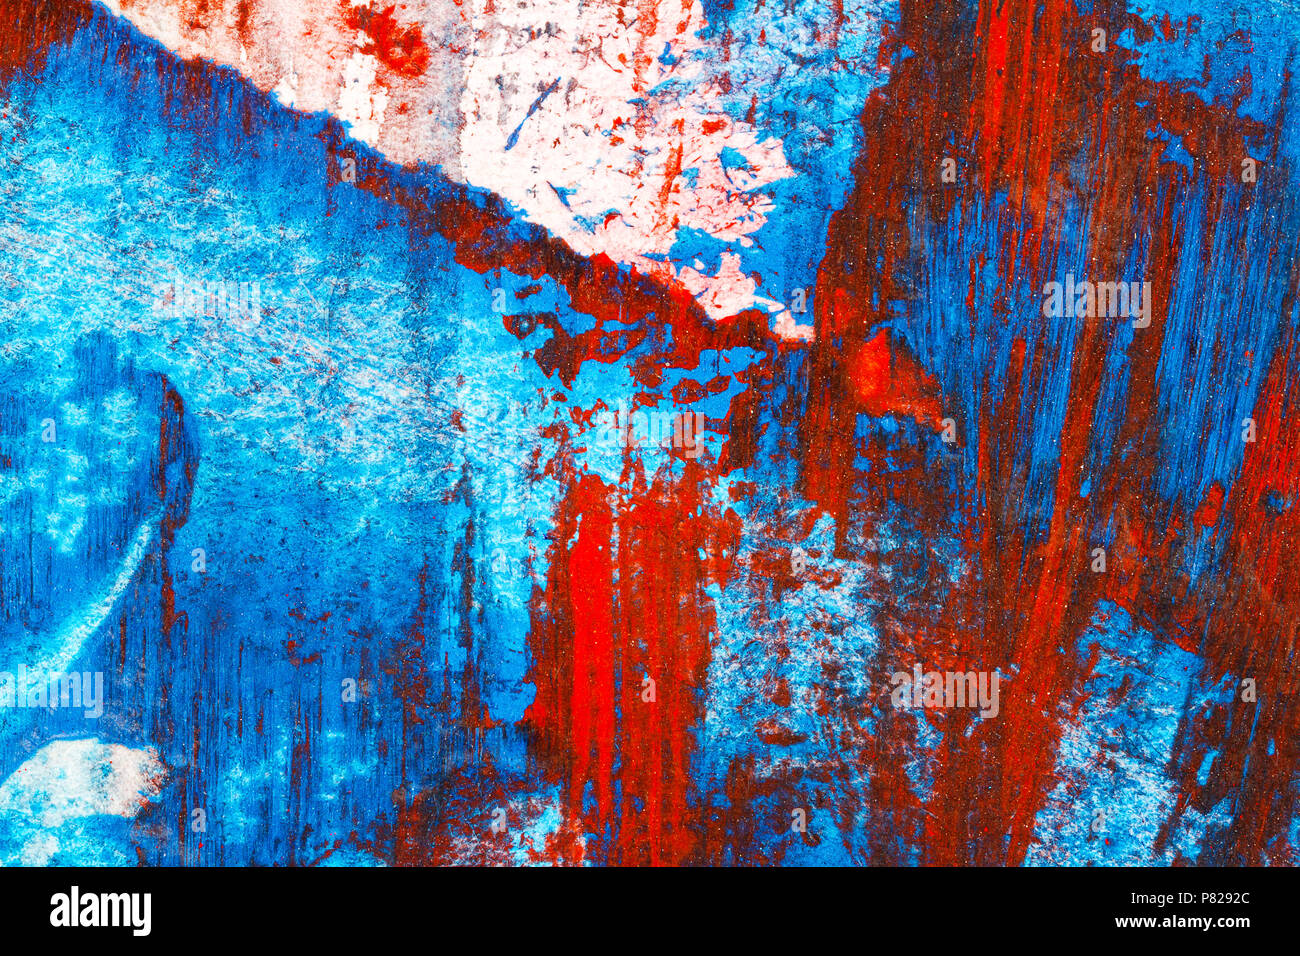 Abstract red and blue hand painted acrylic background, creative abstract hand painted colorful background, close up fragment of acrylic painting on pa Stock Photo